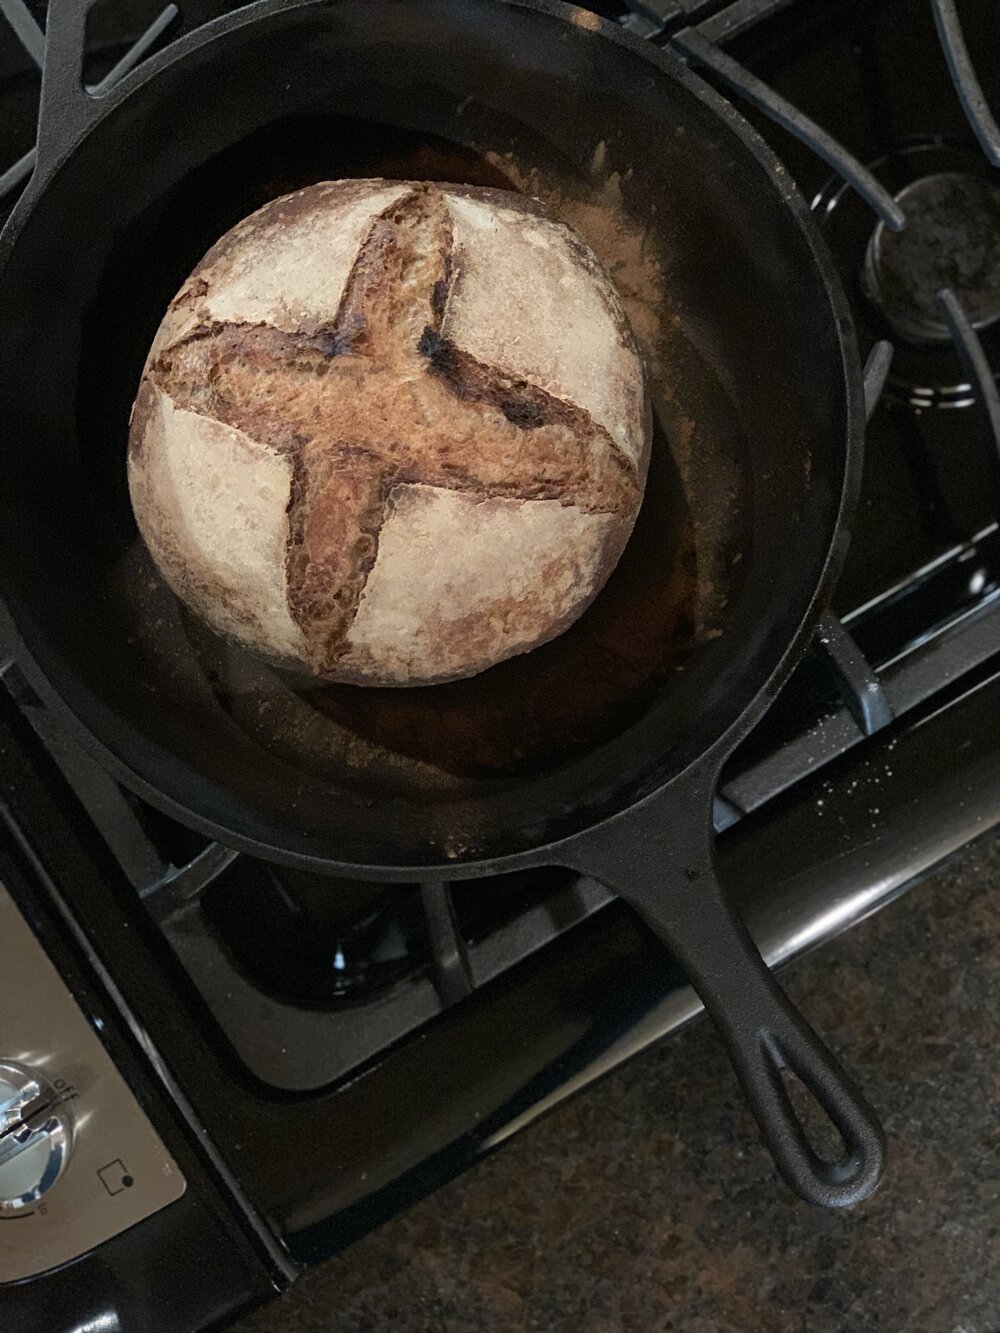 I learned to bake sourdough bread (and miraculously am still keeping it up)!